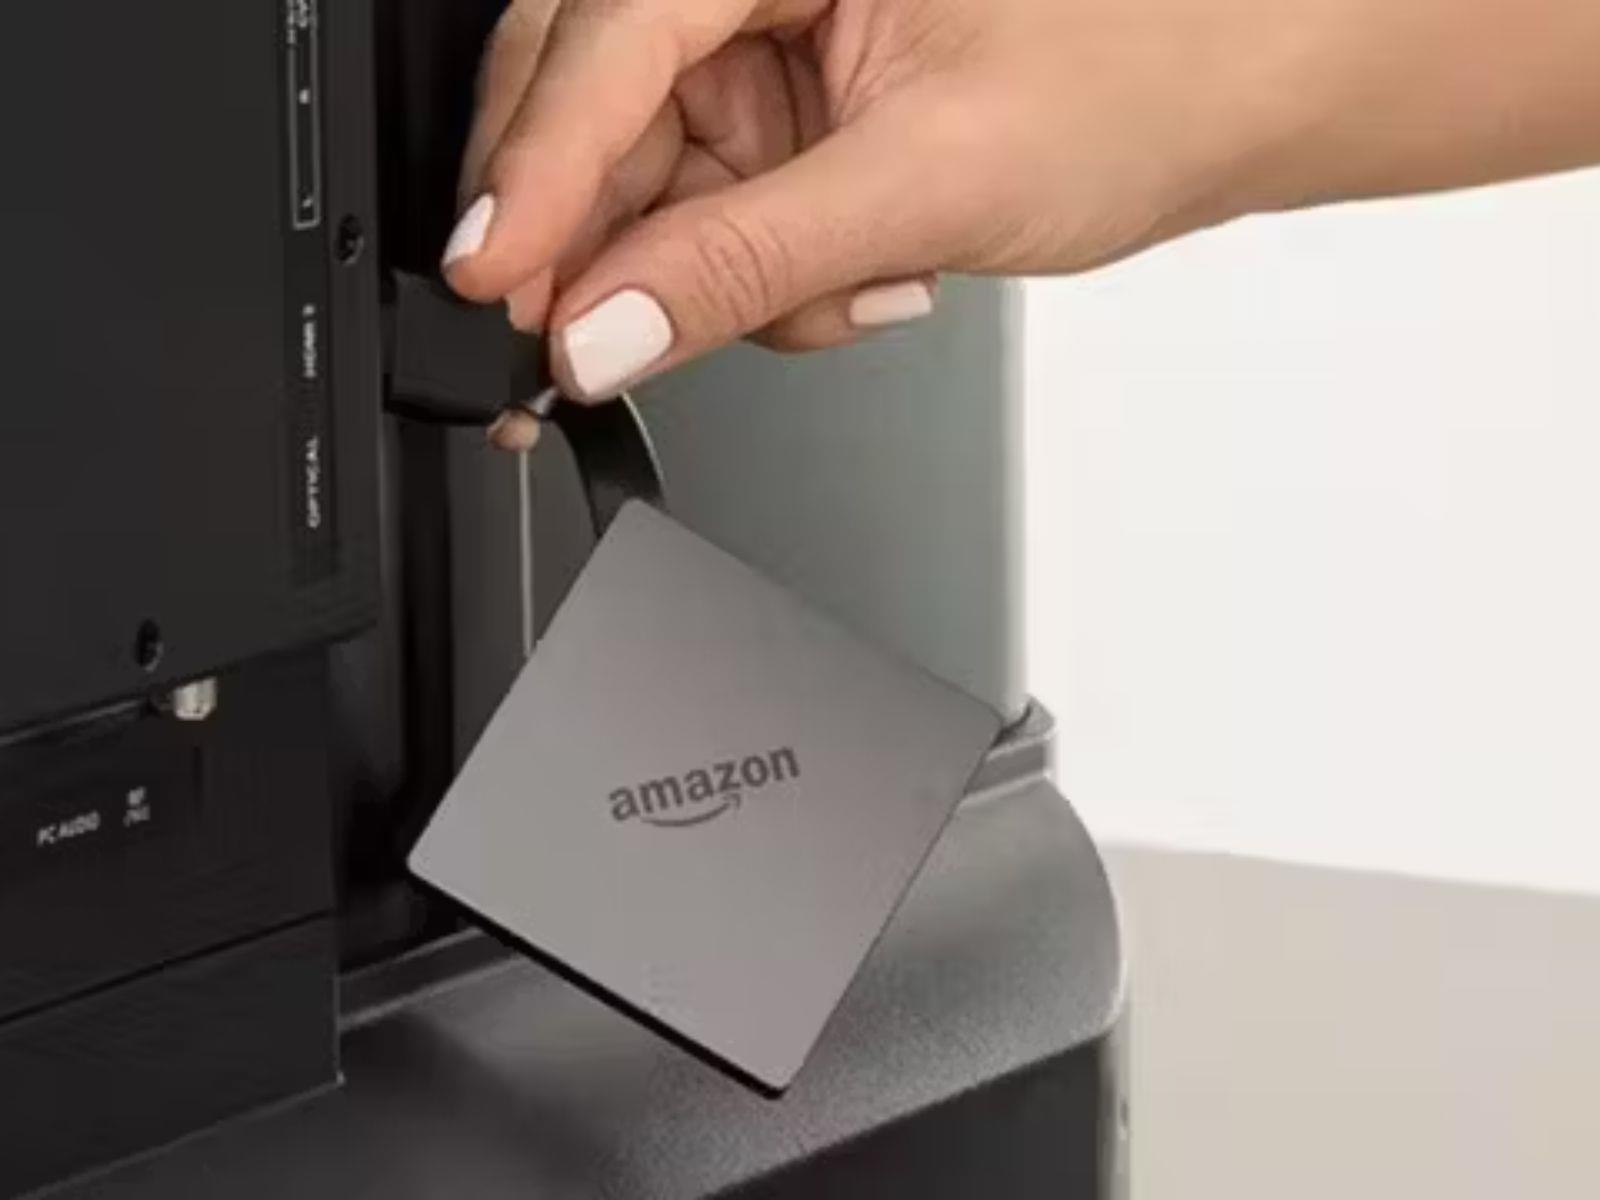 Amazon Fire TV Pendant Being Plugged Into a Tv